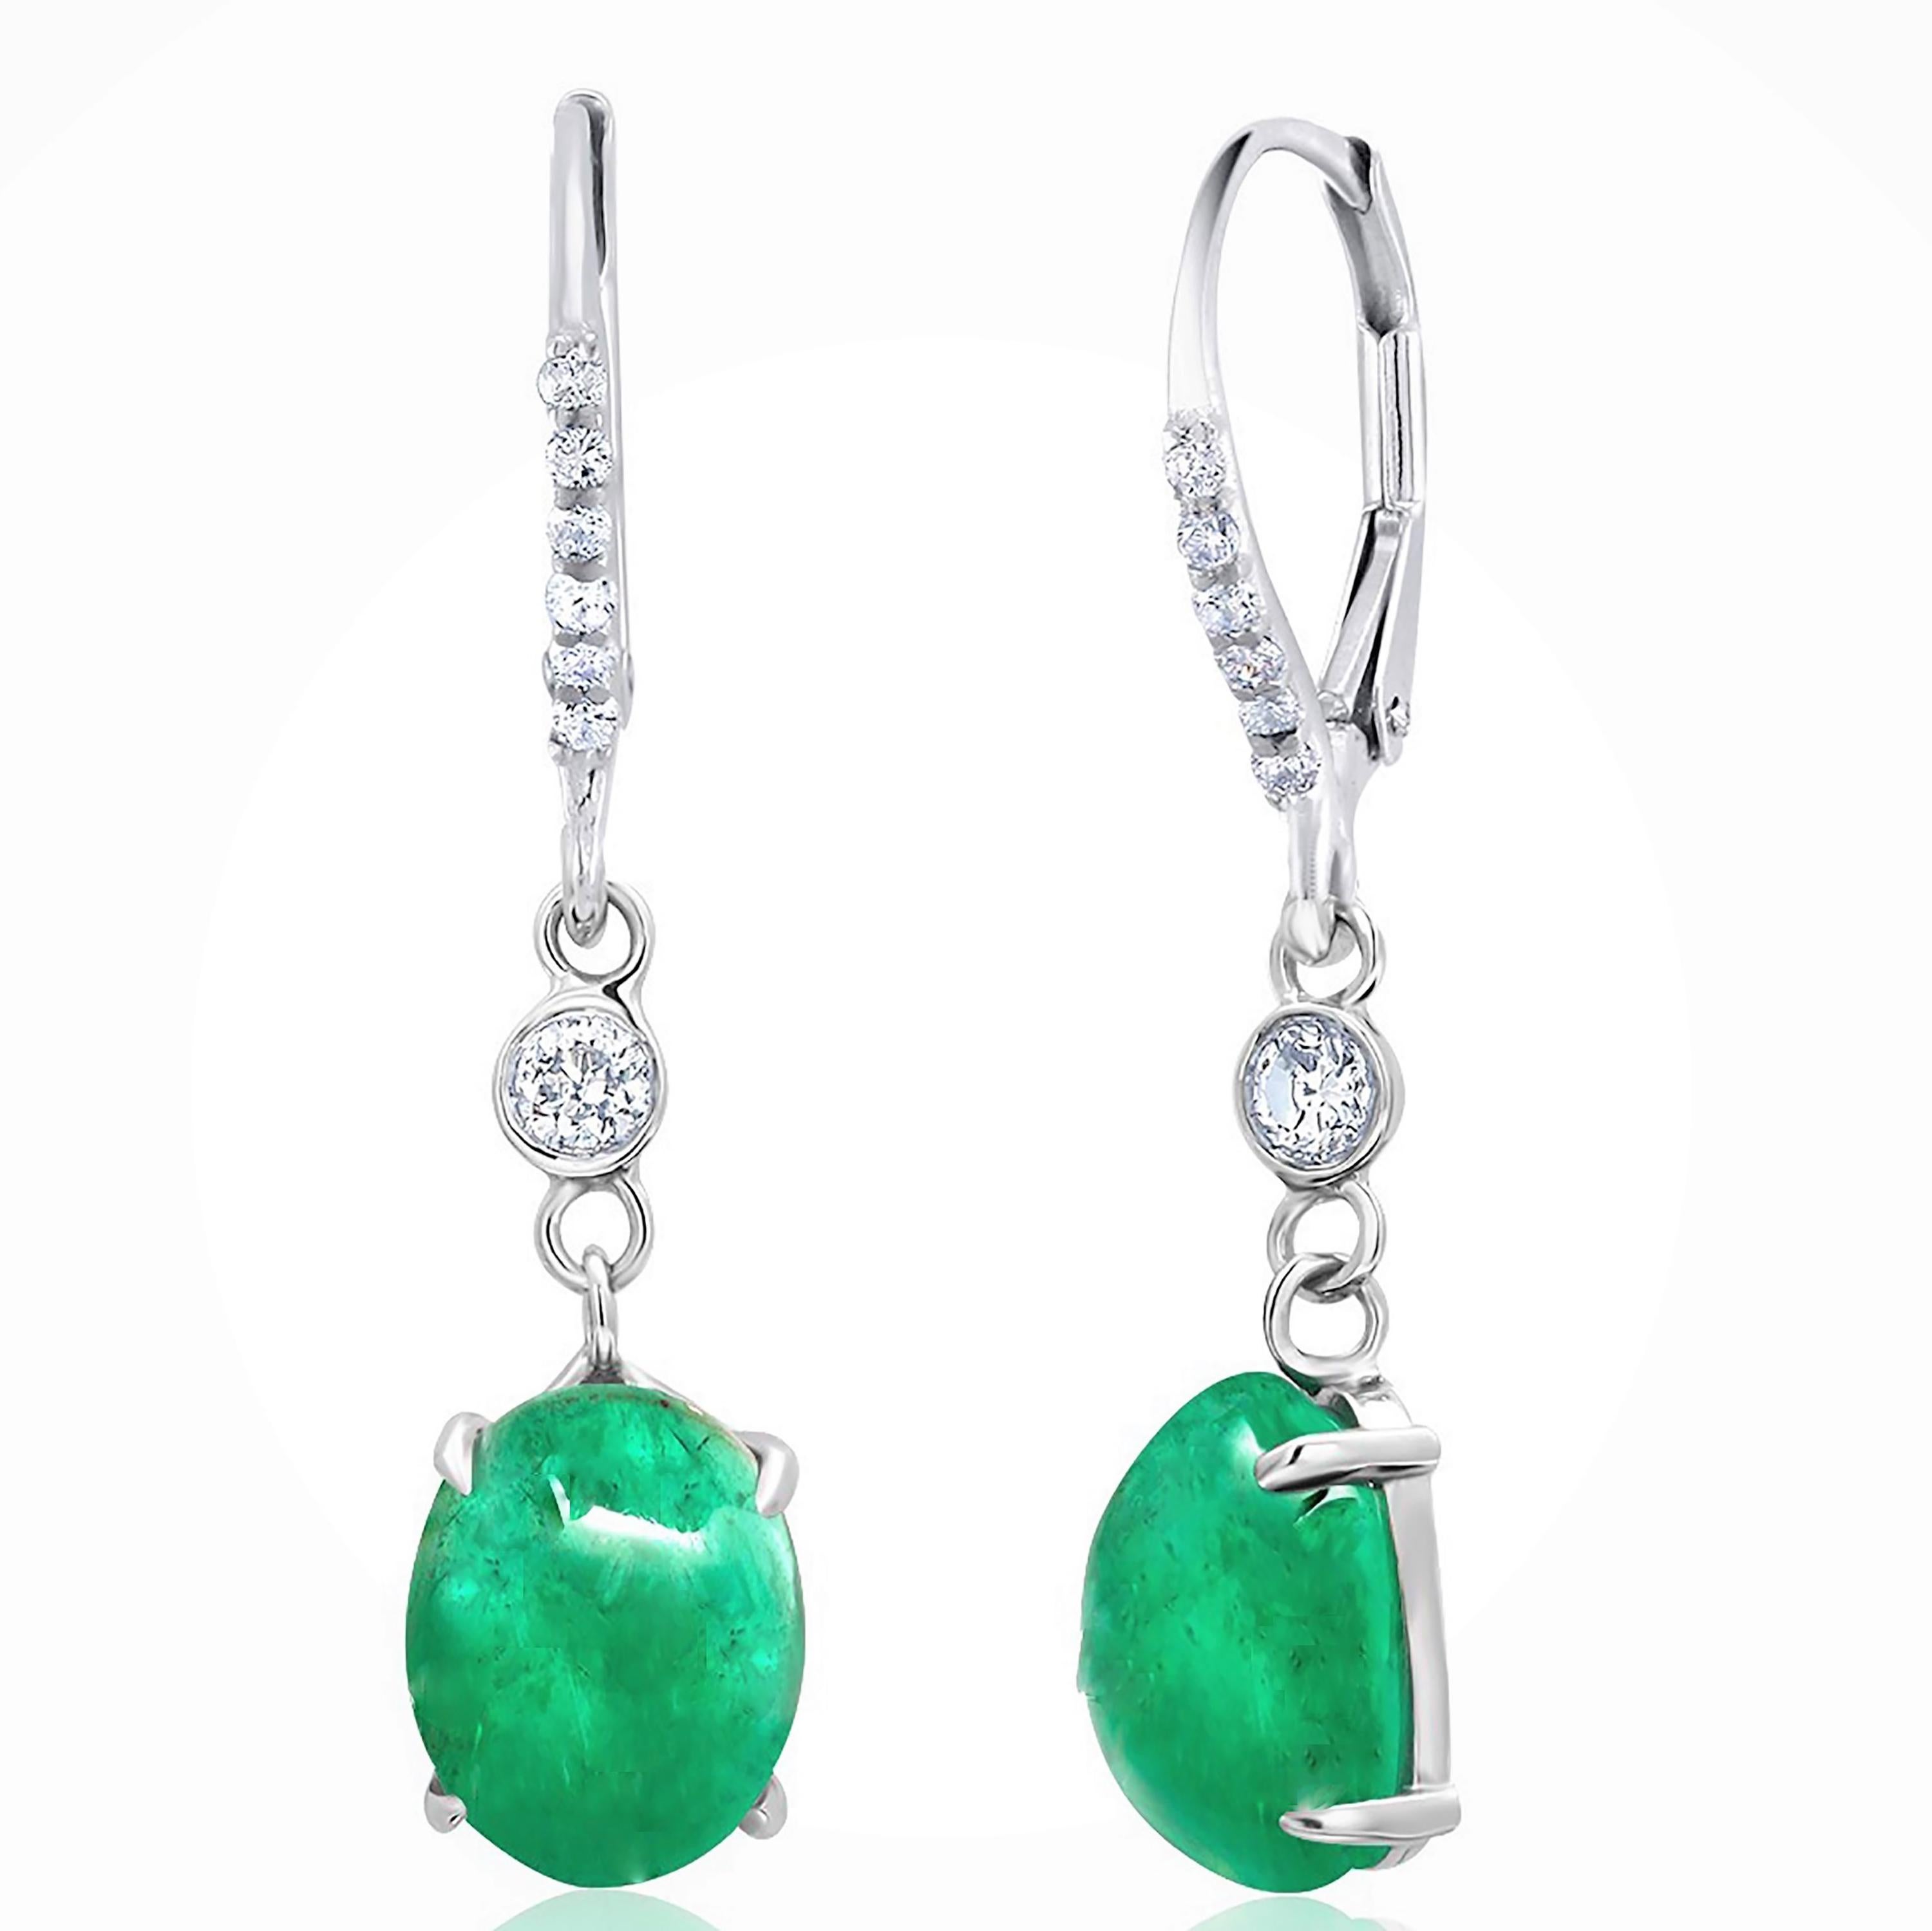 Fourteen karats white gold cabochon emerald and diamond hoop drop earrings 
Diamond weighing 0.45 carat
Cabochon emeralds weighing 4.68 carat 
New Earrings
One of a kind earrings 
Handmade in the USA
Fourteen karat gold earrings are hanging off a